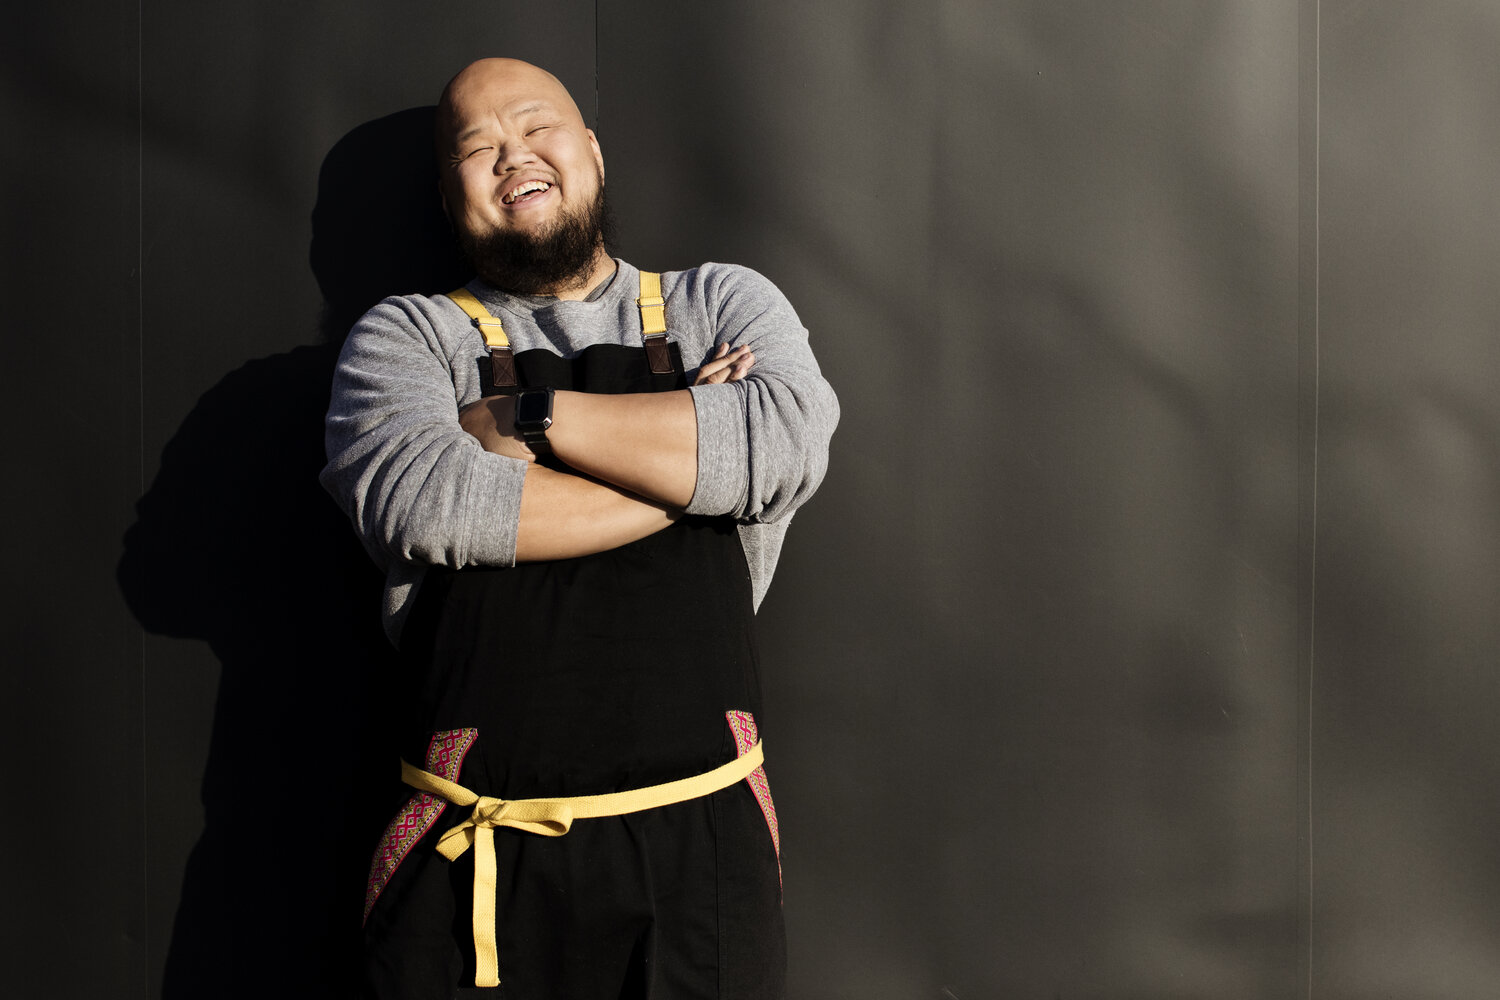 A person with medium light skin tone smiles as they cross their arms across their chest. They are wearing a grey sweatshirt under a black chef's apron. They have a dark beard and a shaved head.